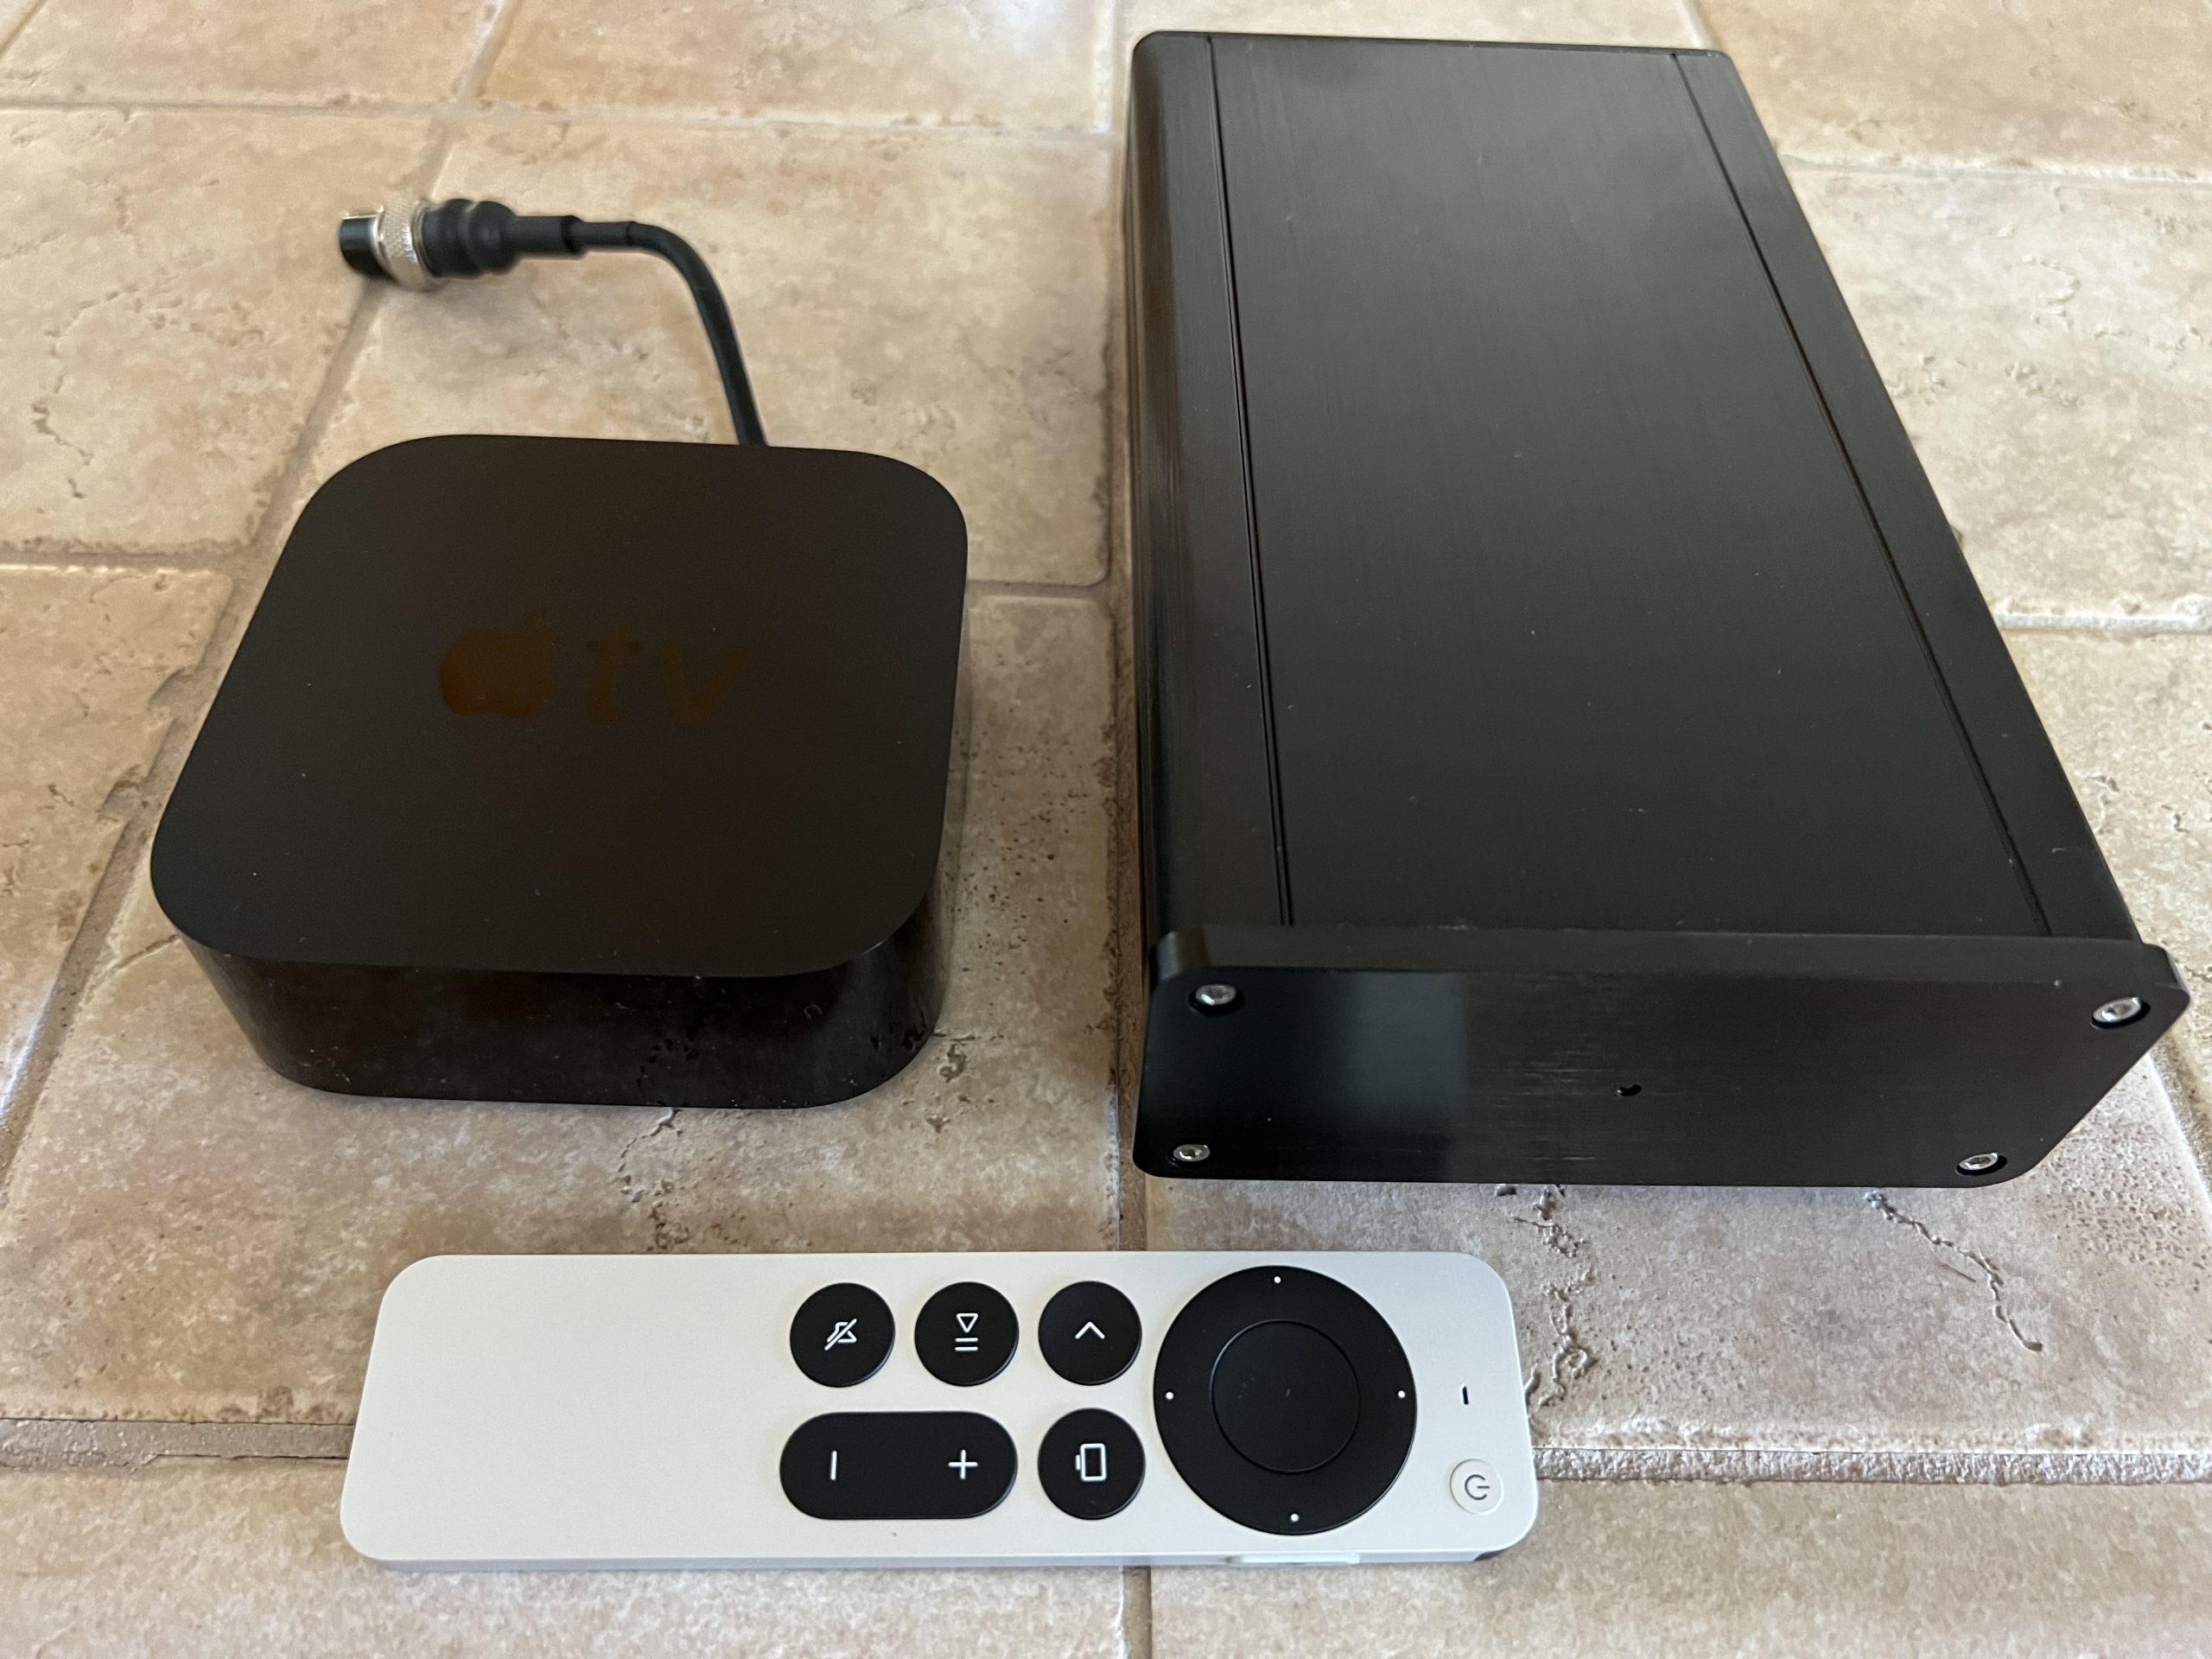 Xtreme Hotrodded Apple 4K Video StreamerImpressions: A Brief BLAST about the Xtreme Projectors Hot-Rodded Apple TV 4K Video Streamer - Positive Feedback